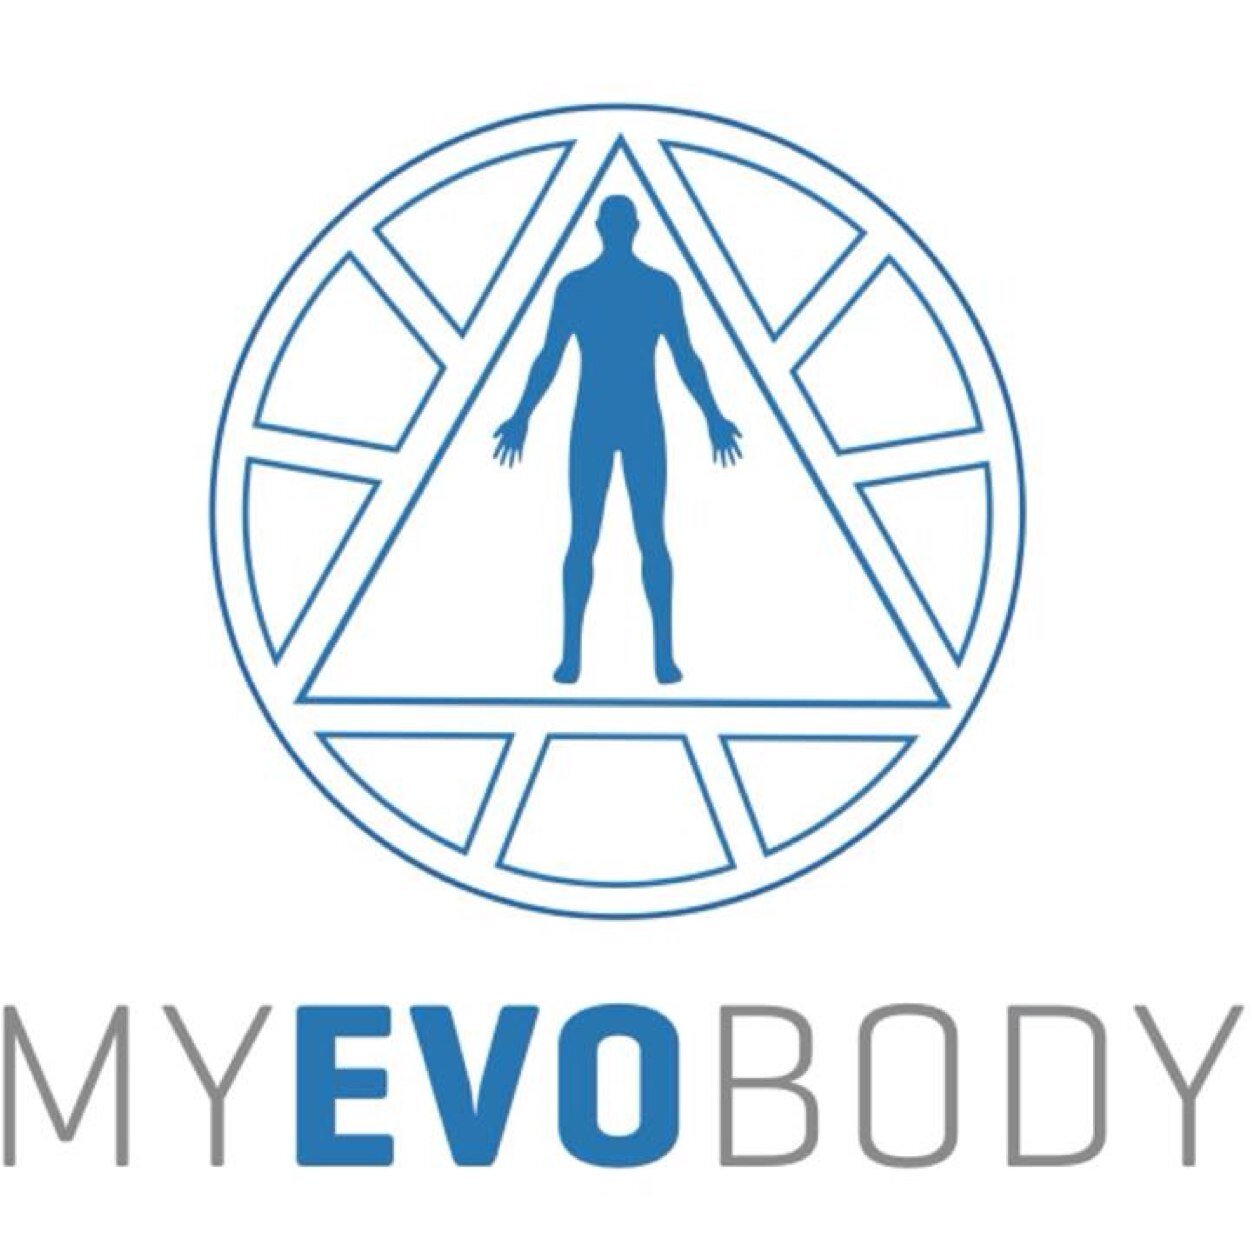 World class boutique strength & conditioning facility in Cape Town. Goal driven training, private & small group classes. Schedule & fees info@myevobody.com